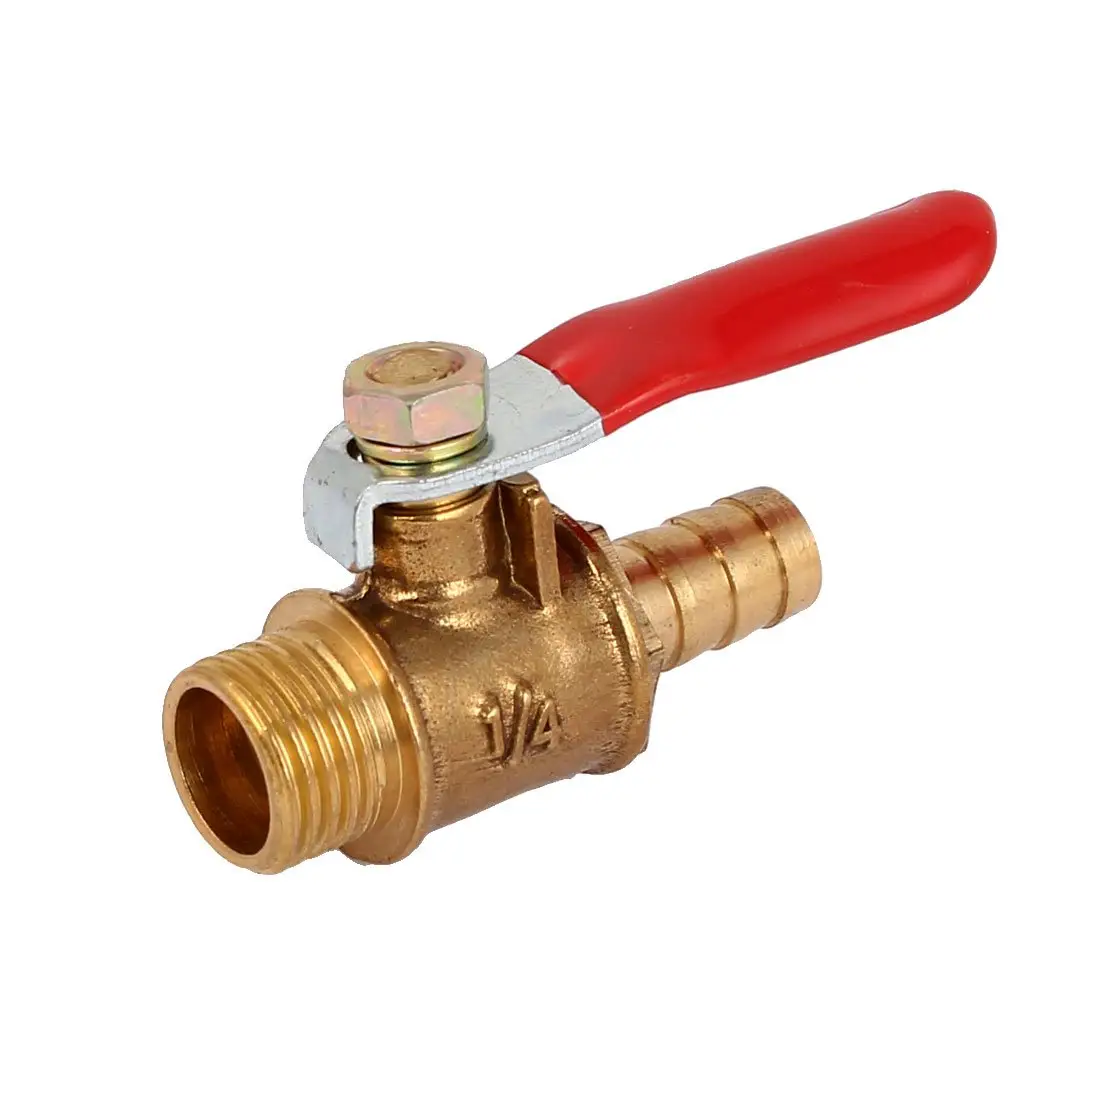 Indian Export Quality Brass Mini Ball Valve With Hose Barb for Open and Close Valve Available at Affordable Price